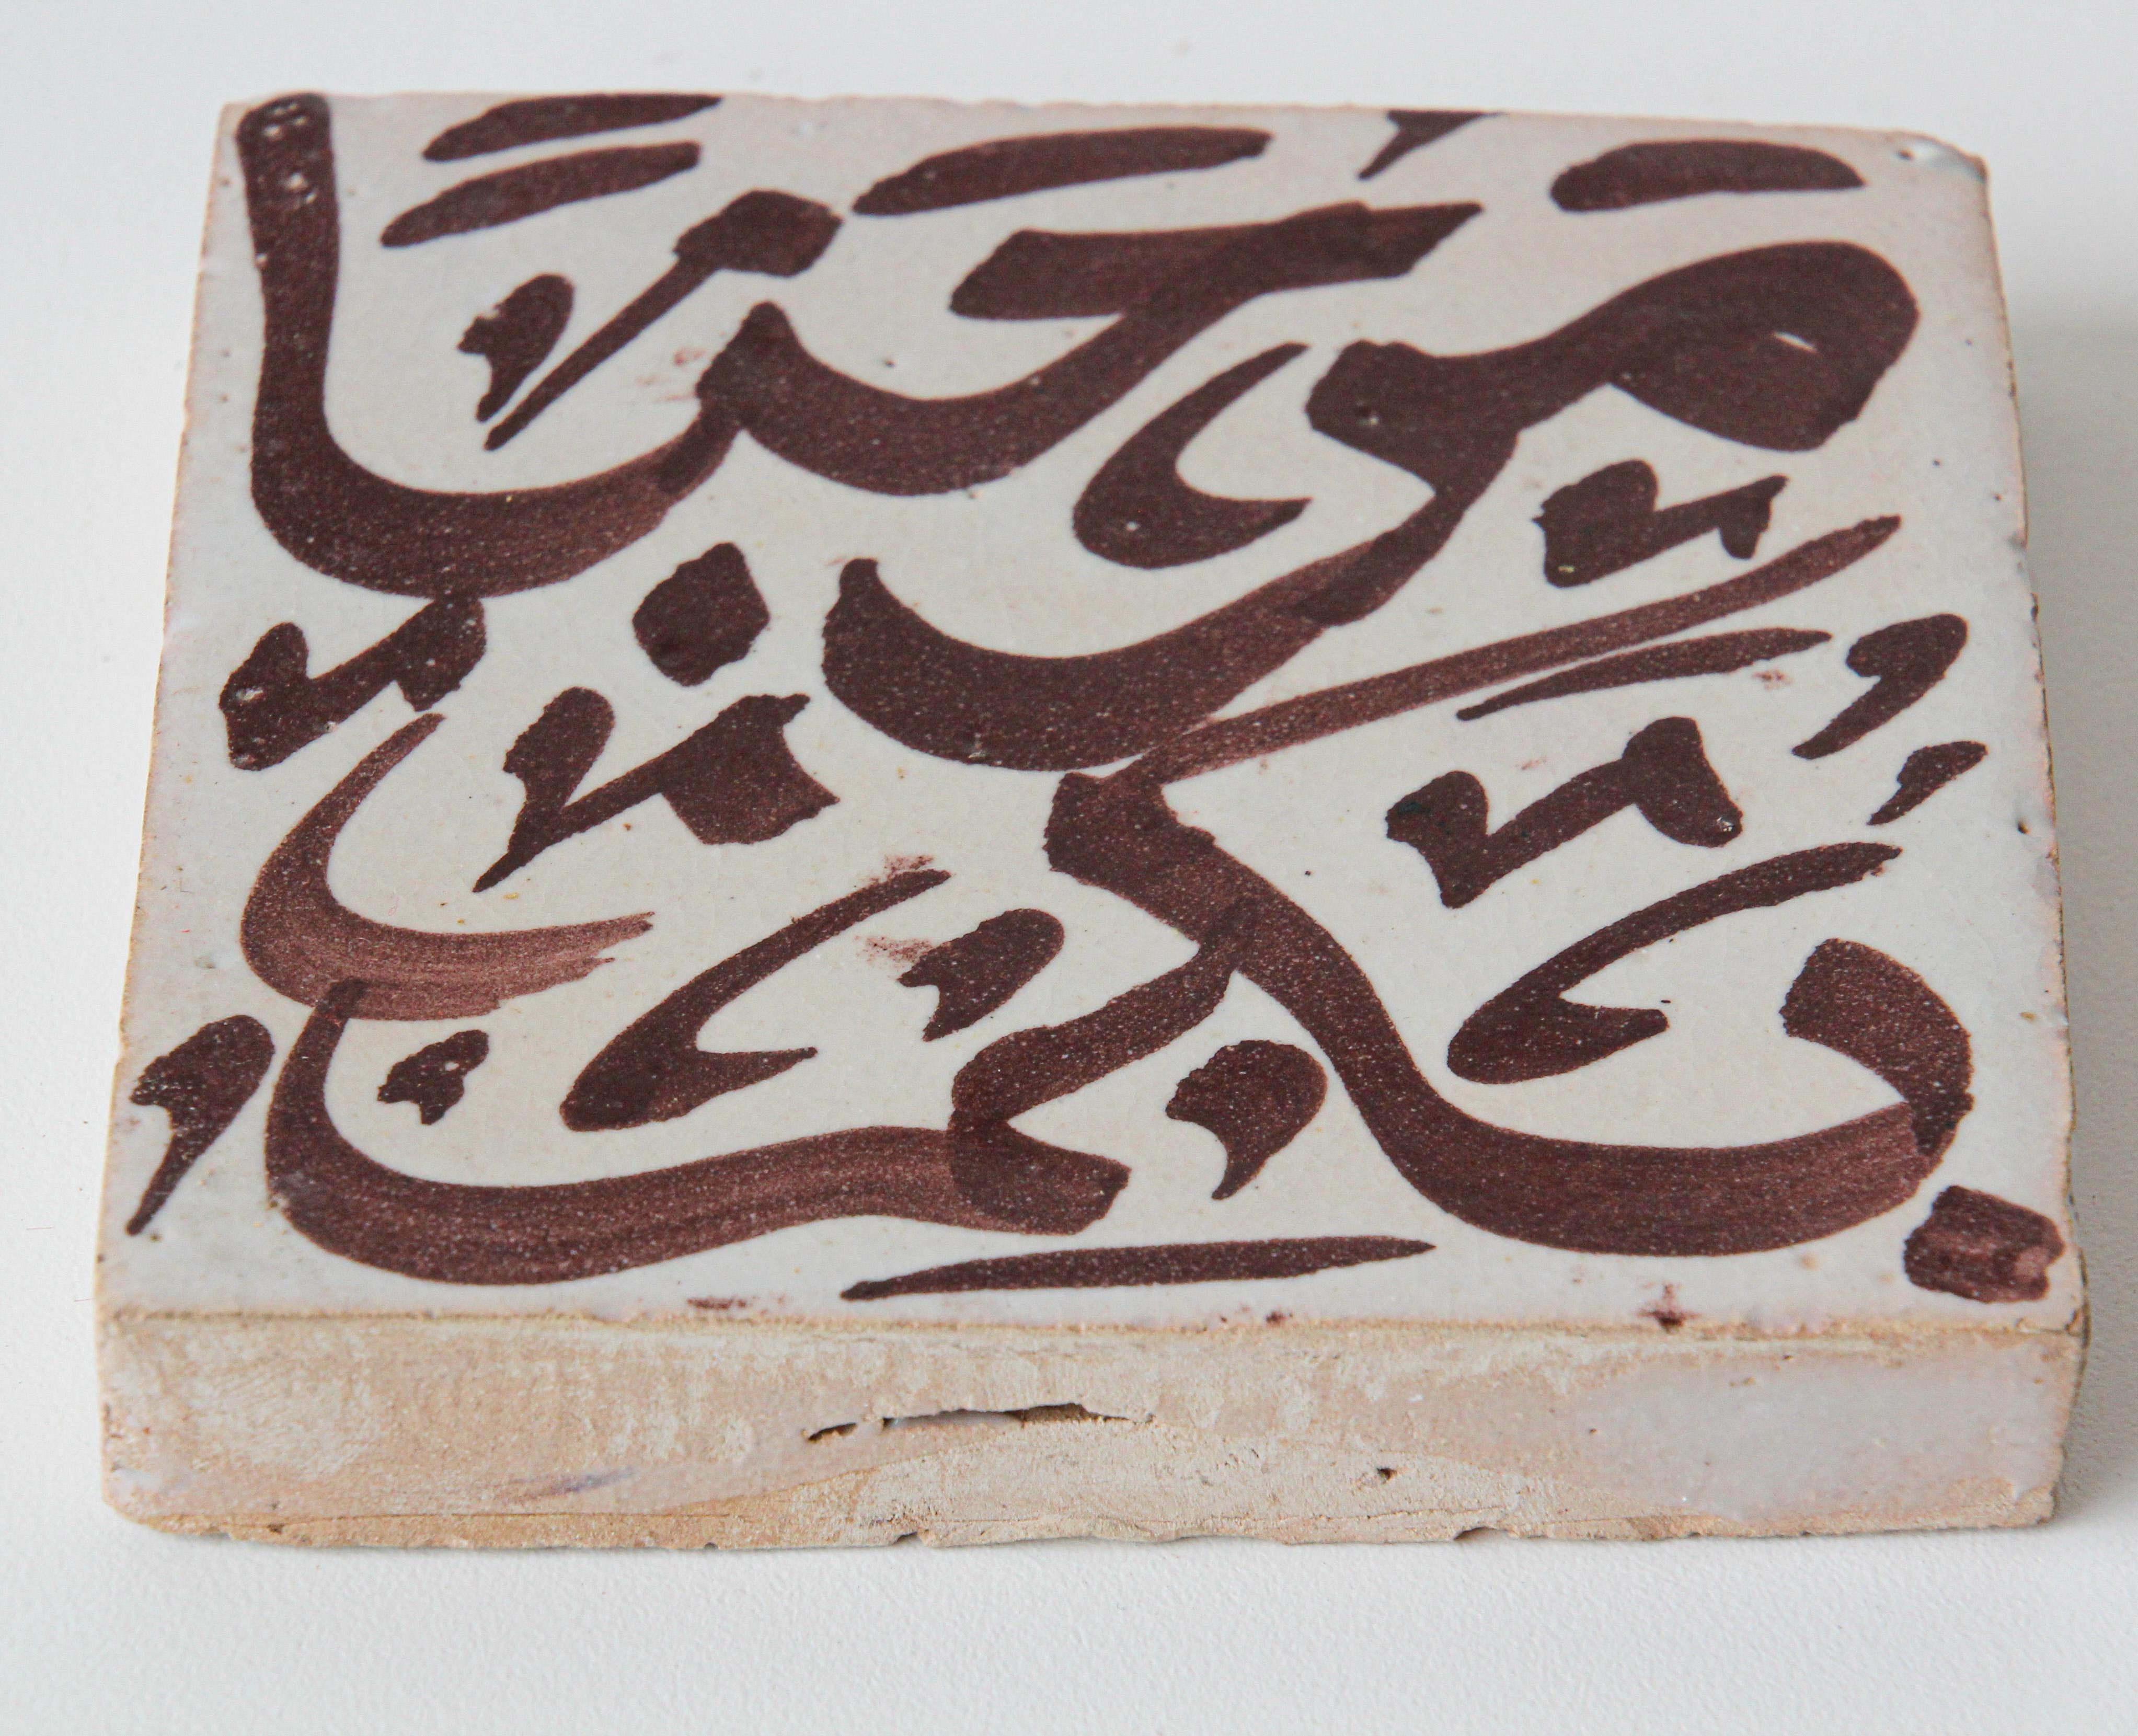 Hand-Crafted Moorish Ceramic Tile with Arabic Writing in Brown